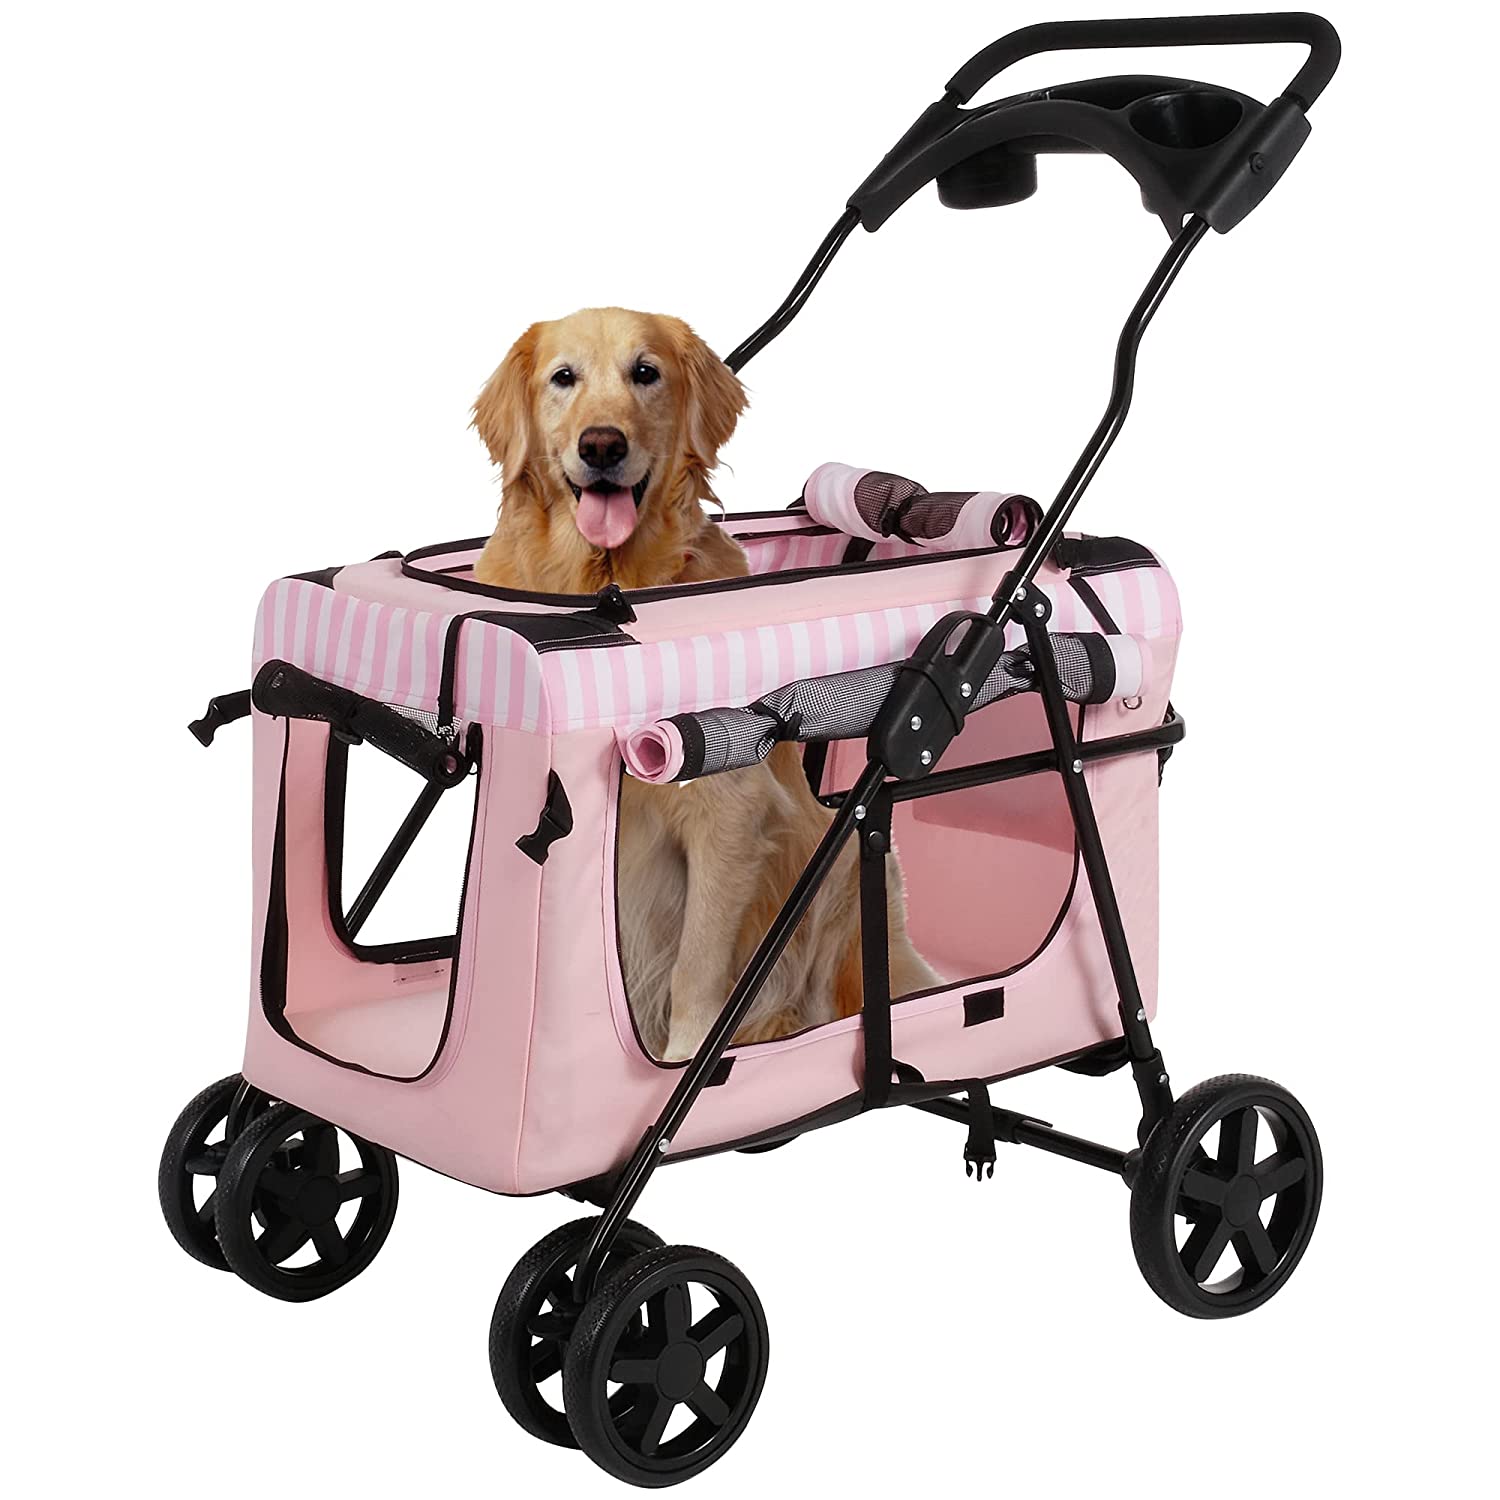 LUCKYERMORE 3-in-1 Folding Travel Pet Carrier Dog Cat Stroller with Water Cup Holder, Pink